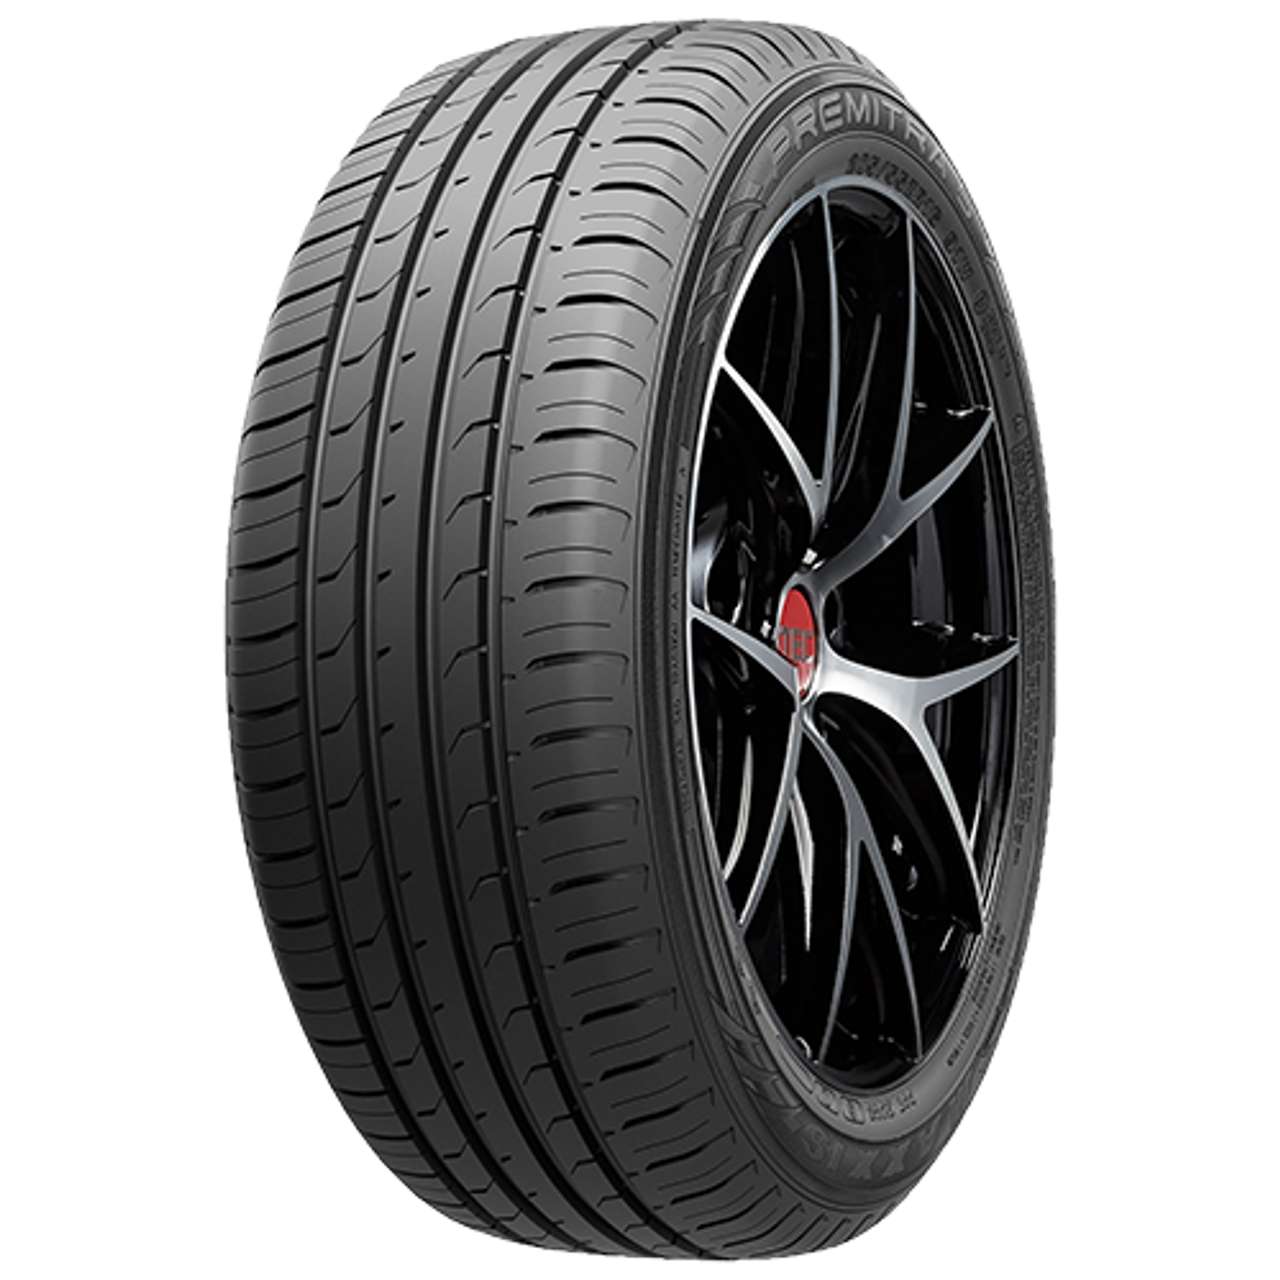 MAXXIS PREMITRA HP5 195/60R16 89V BSW